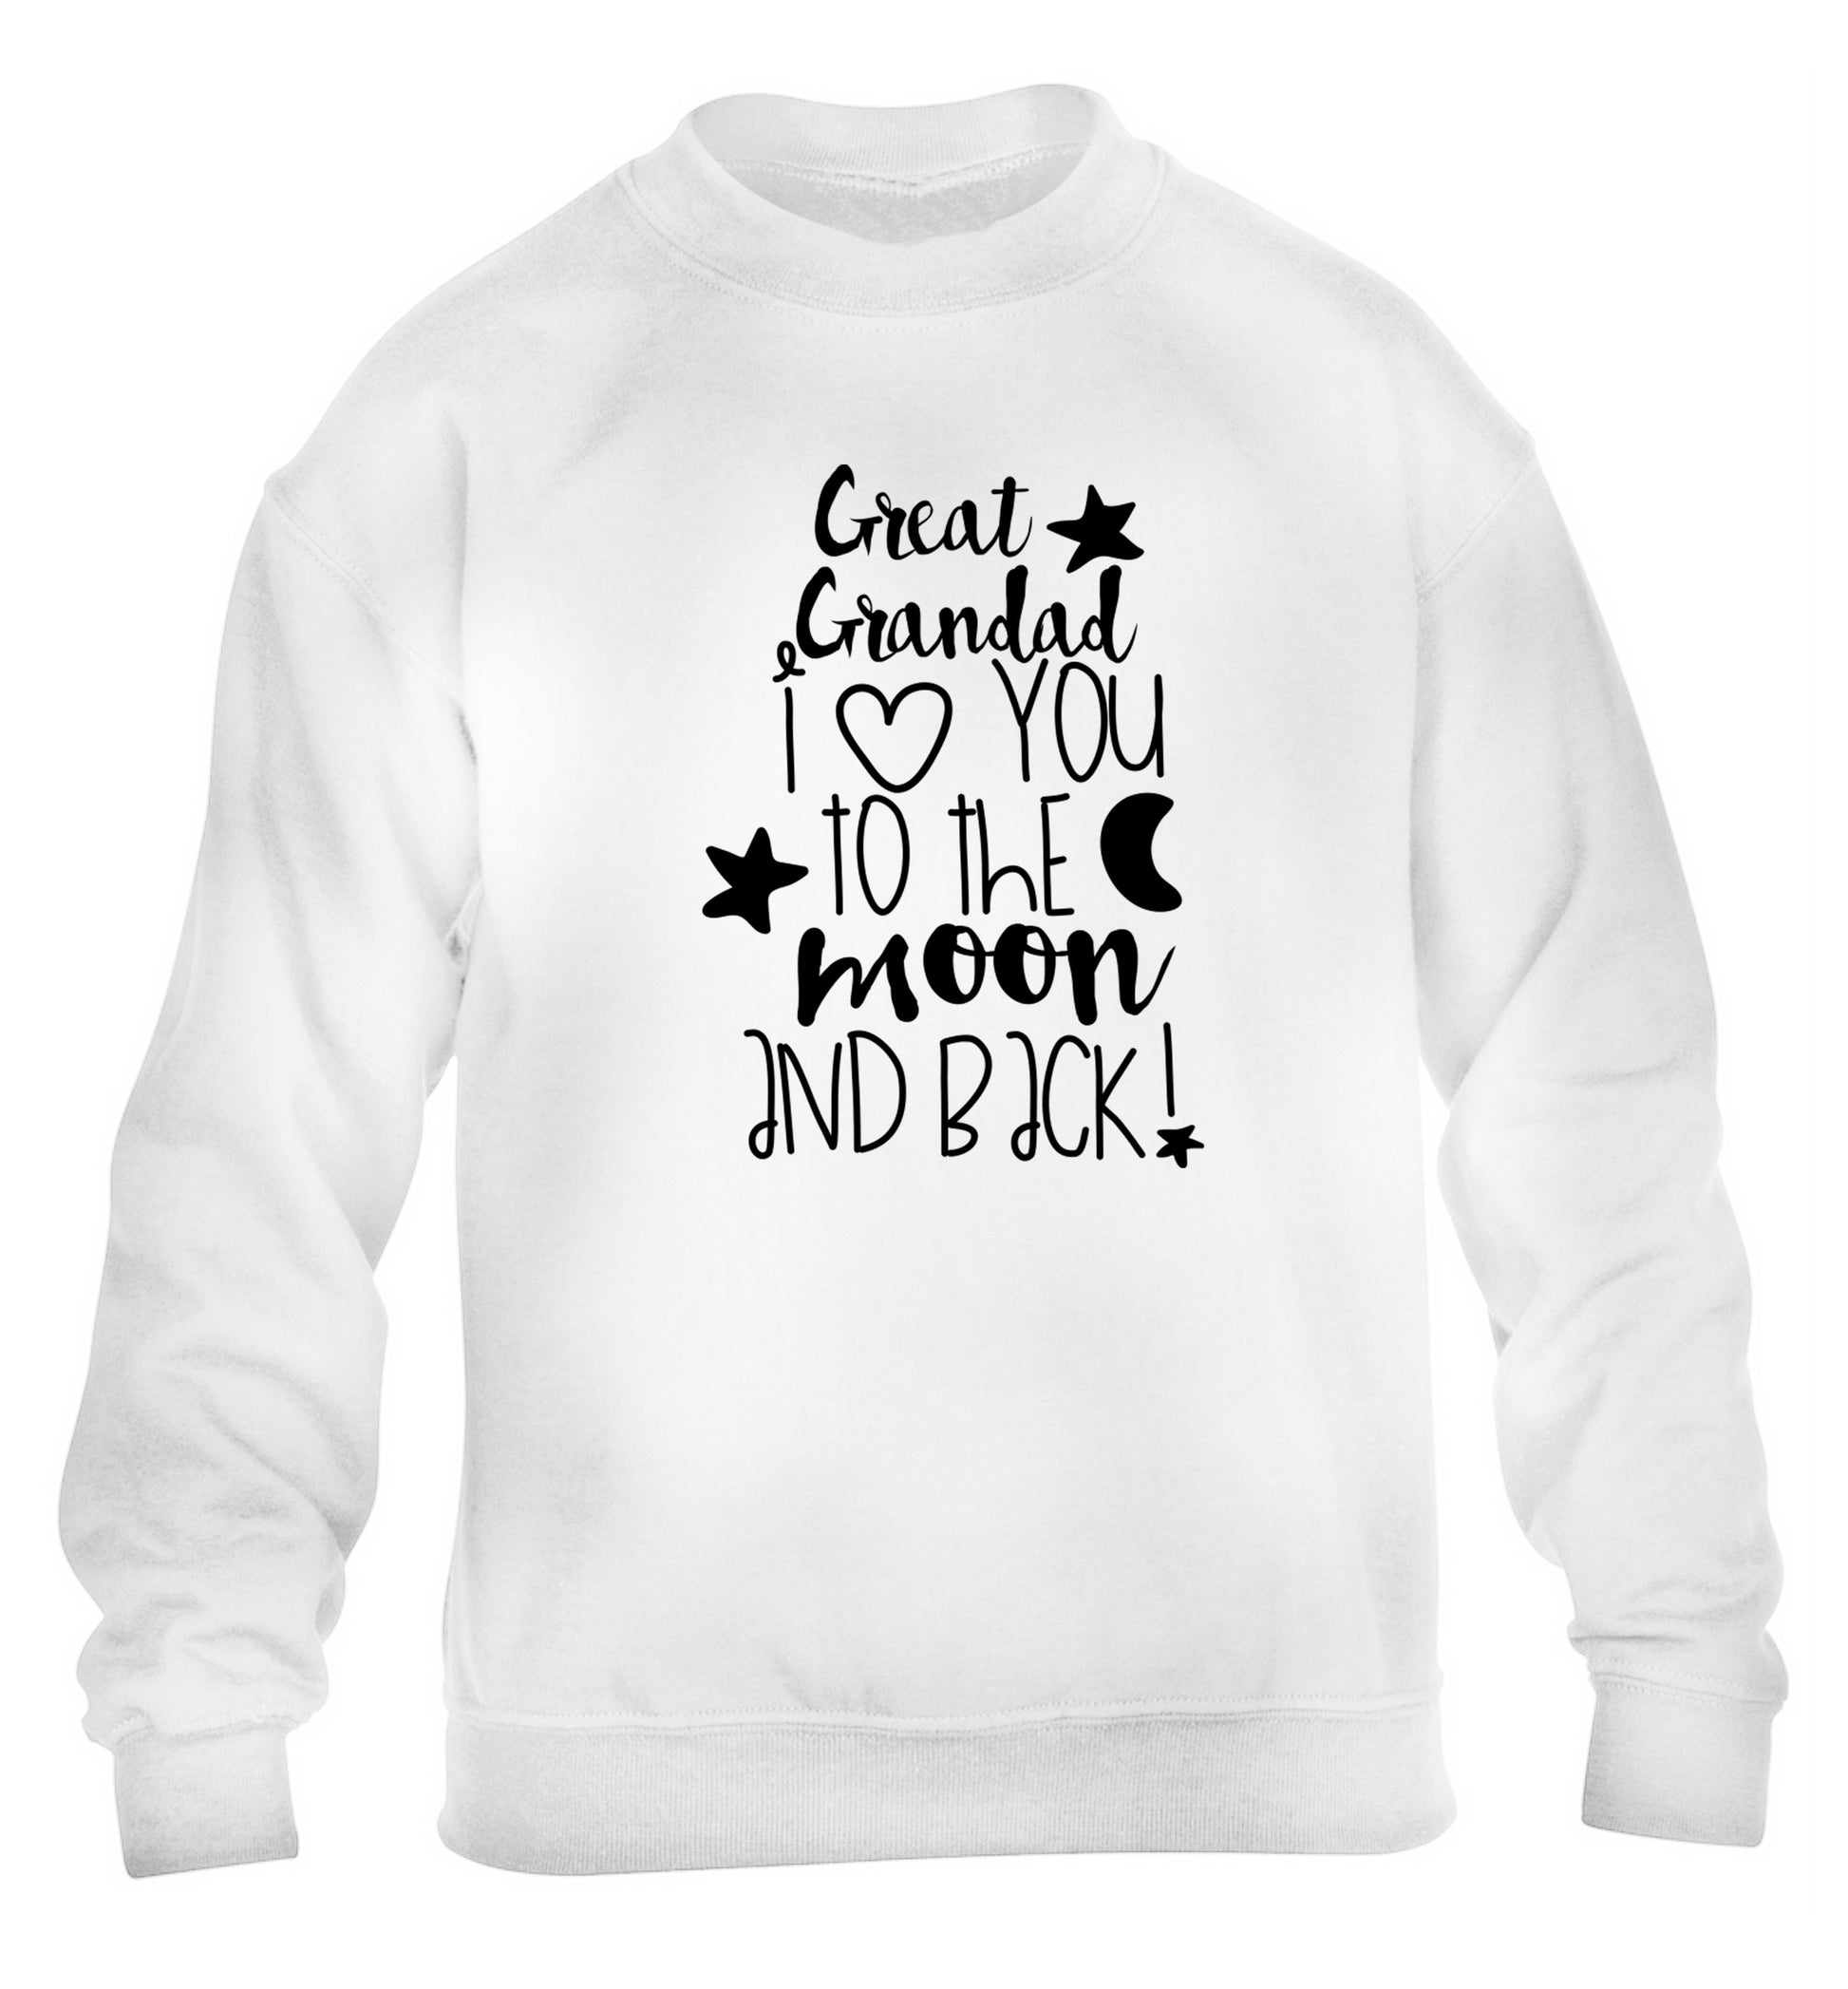 Great Grandad I love you to the moon and back children's white  sweater 12-14 Years